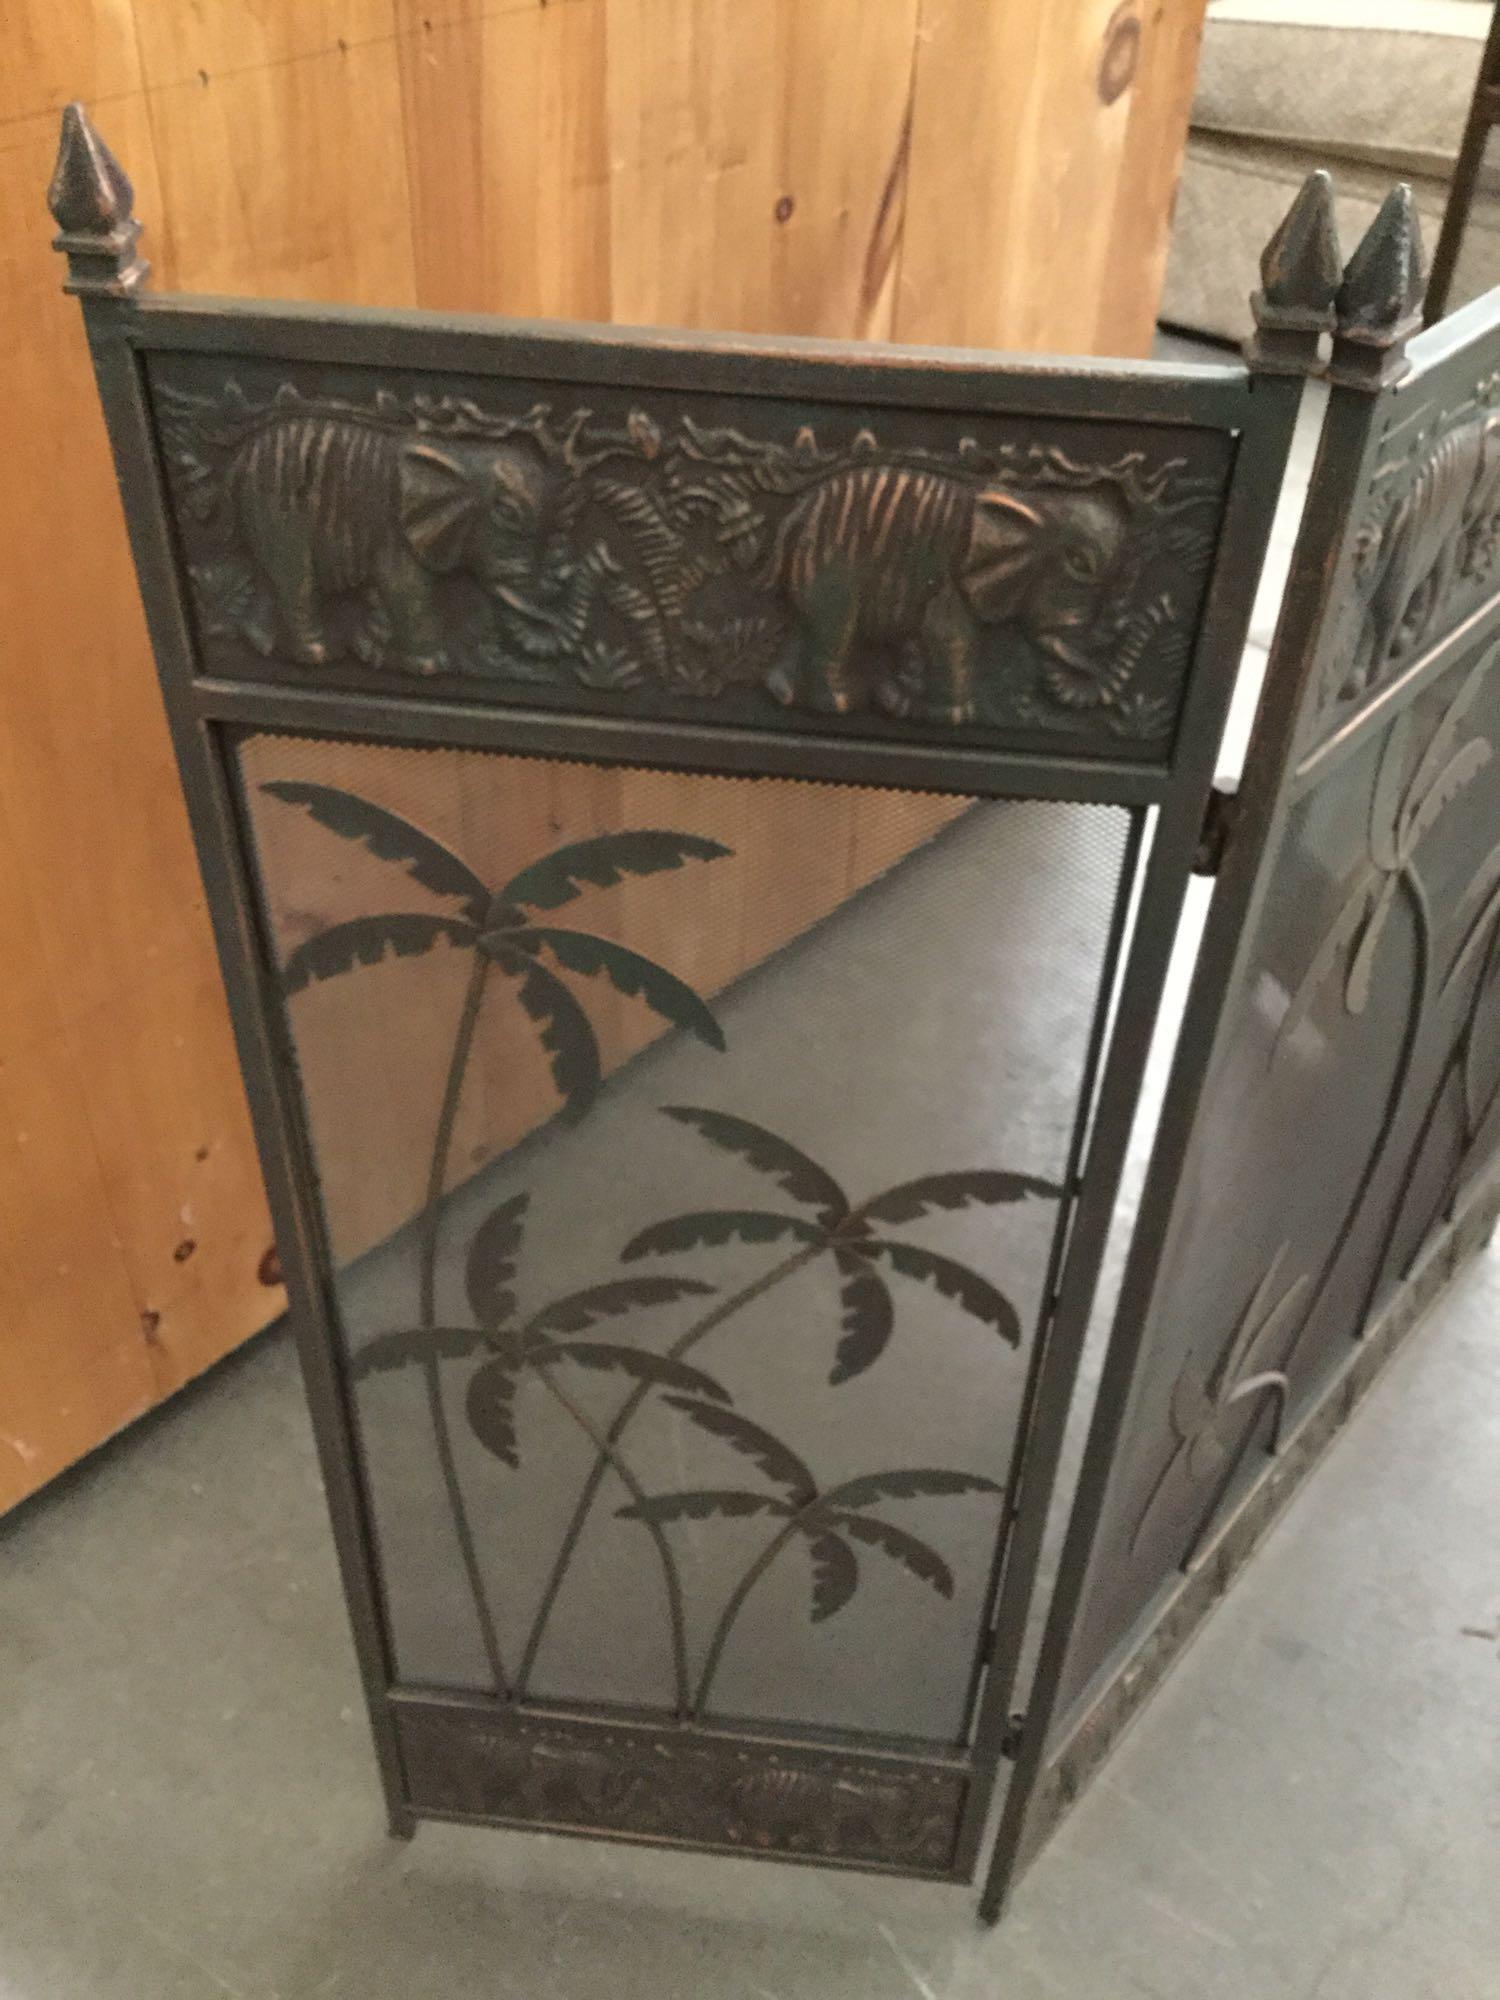 Bronzed African elephant and palm tree motif fireplace screen with brass fireplace set